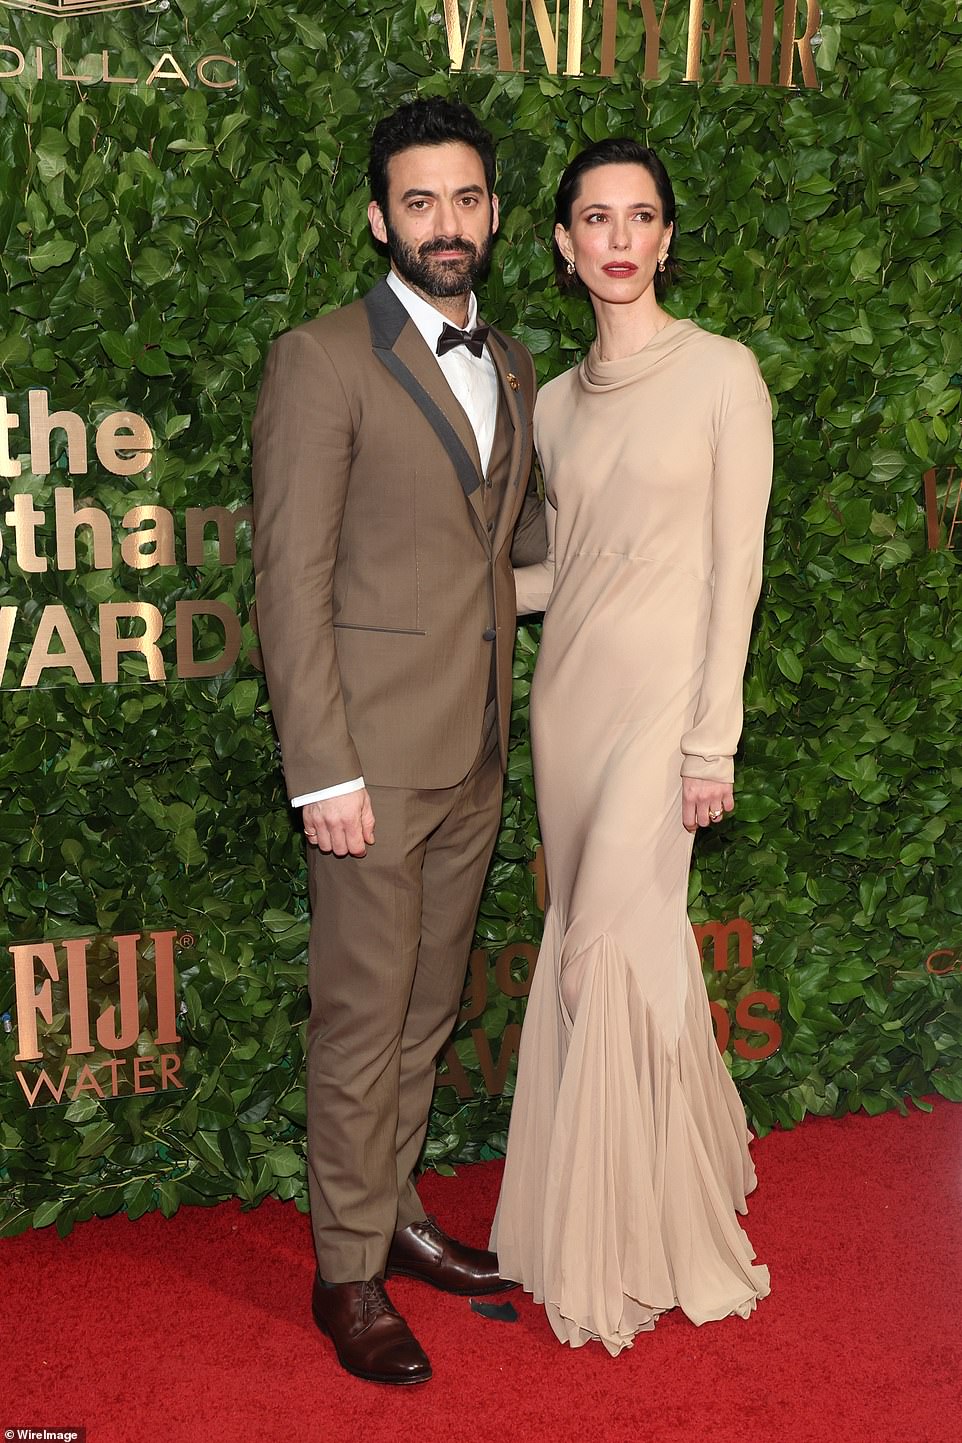 Attractive couple: Her husband, Morgan Spector, who she met while co-starring in a Broadway production in 2014, wore a brown suit